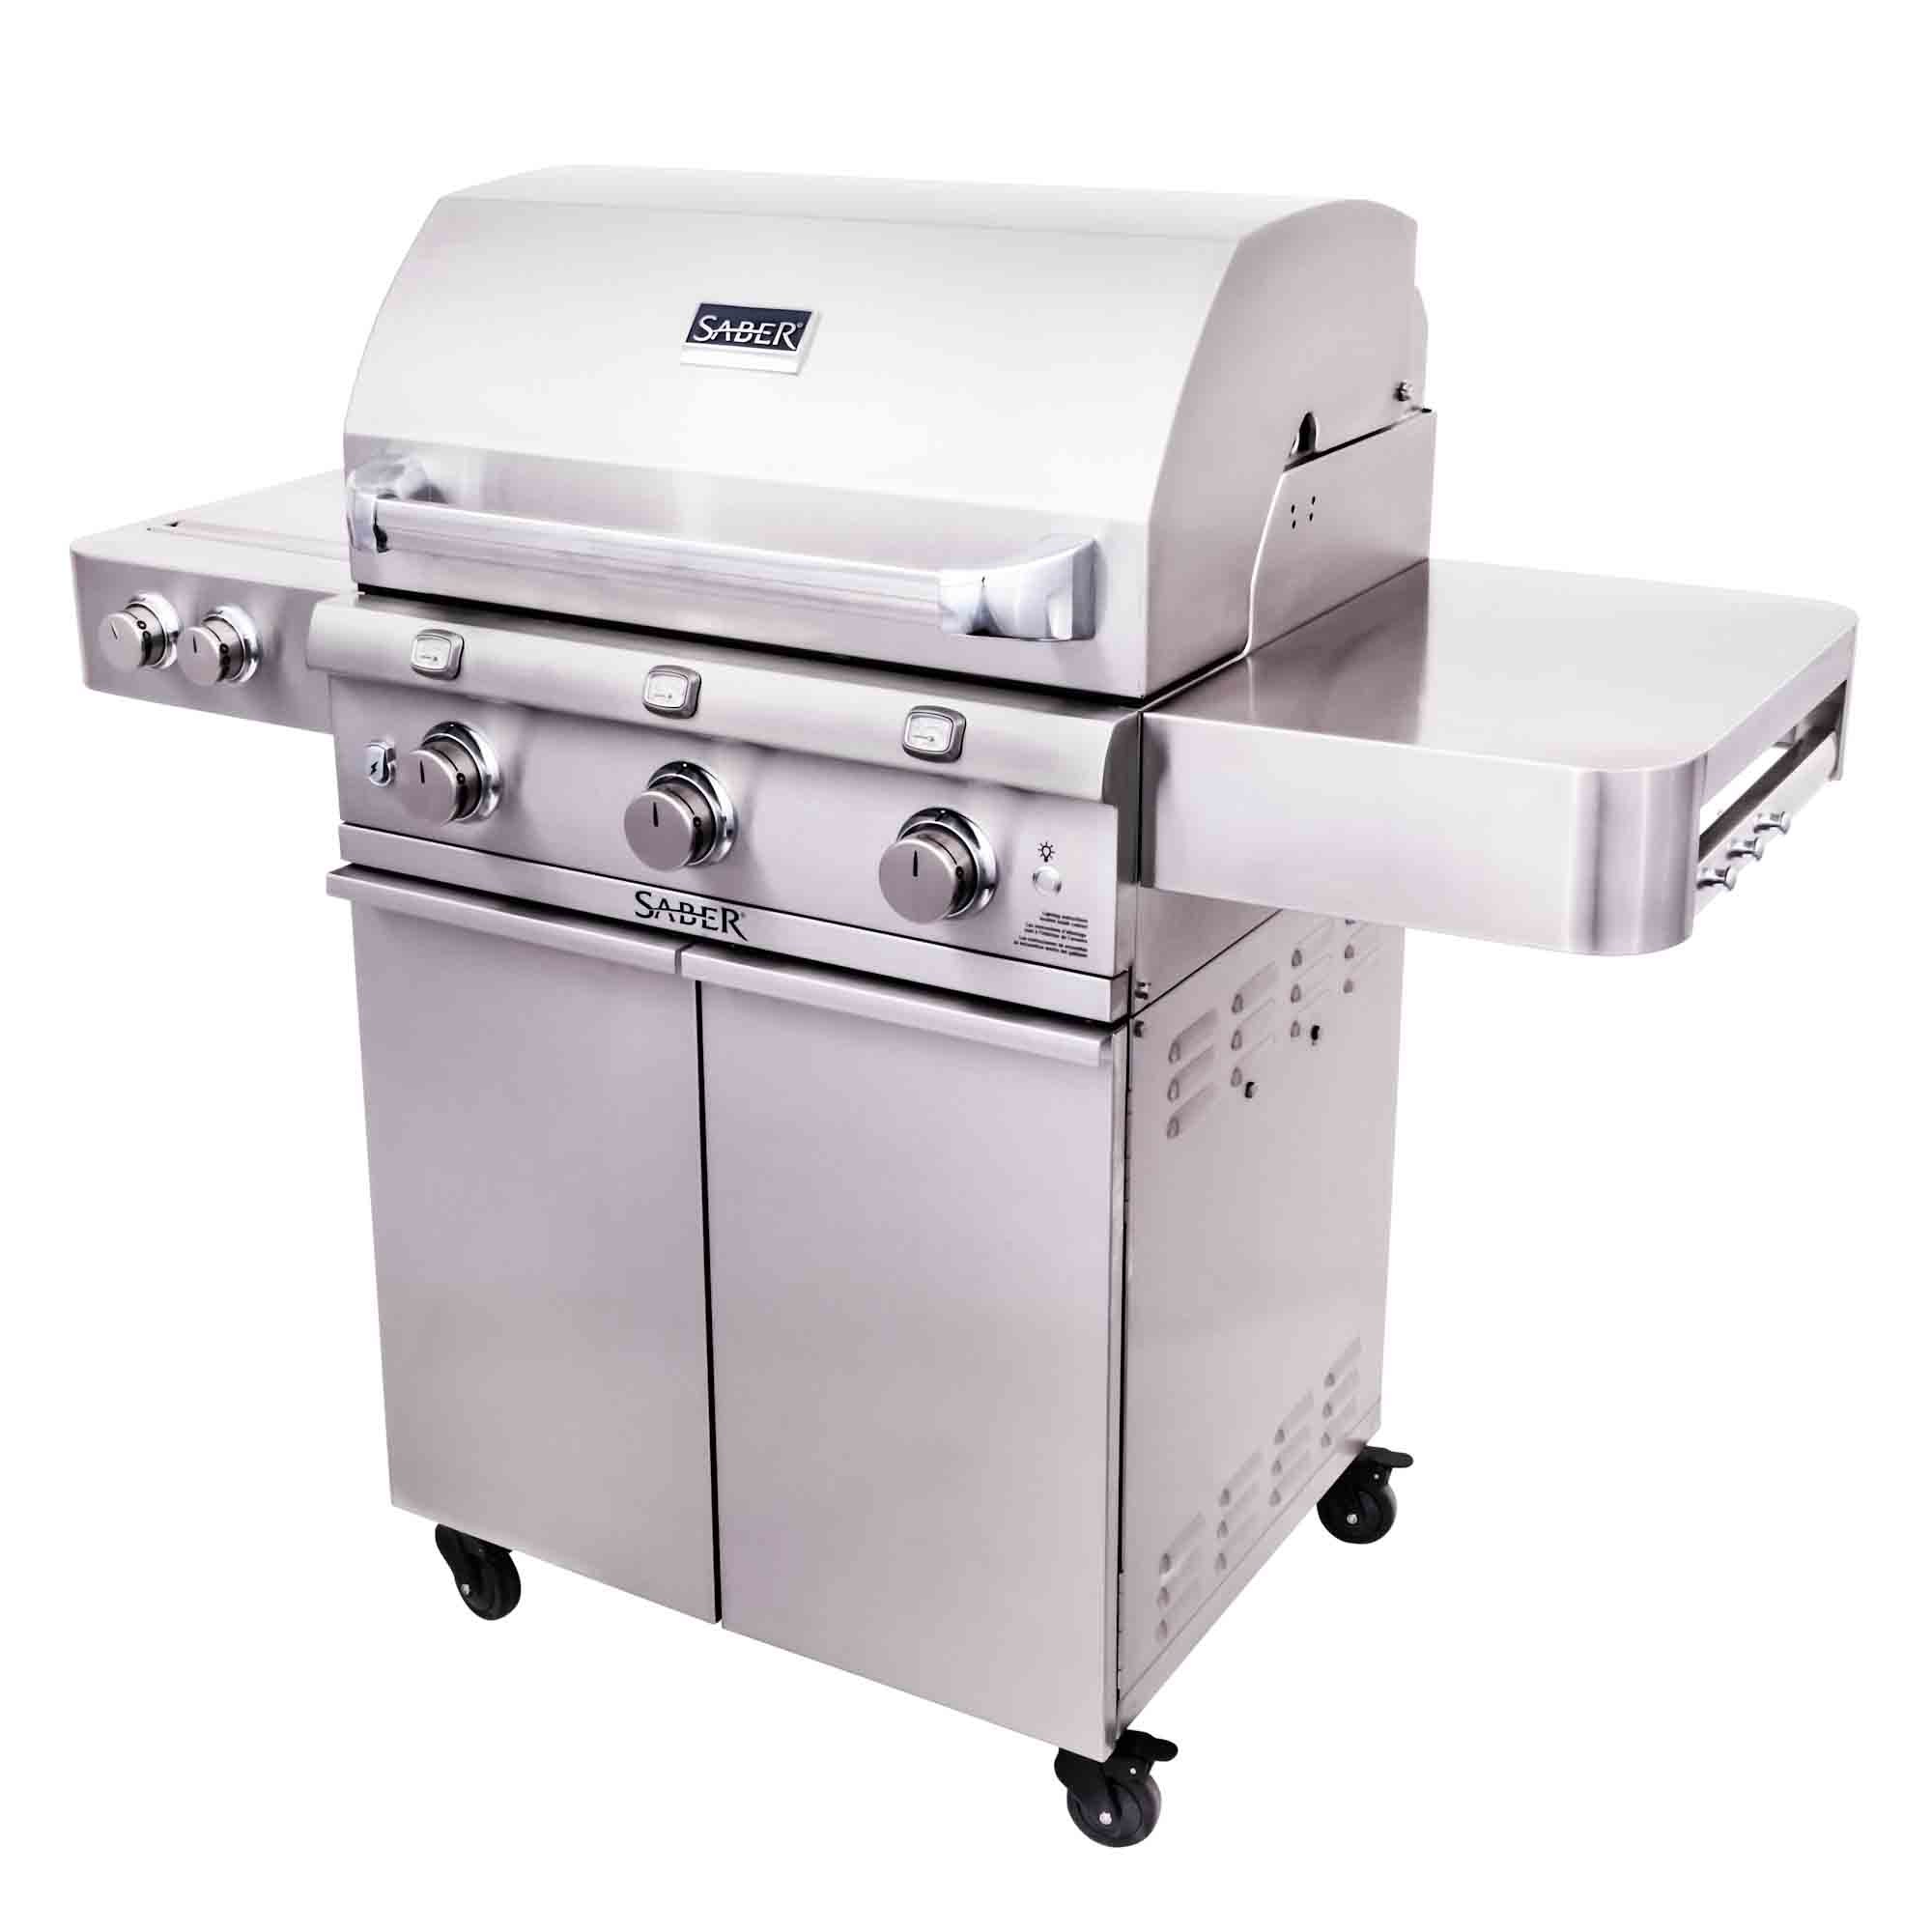 SABER® Stainless 3-burner gas grill for sale